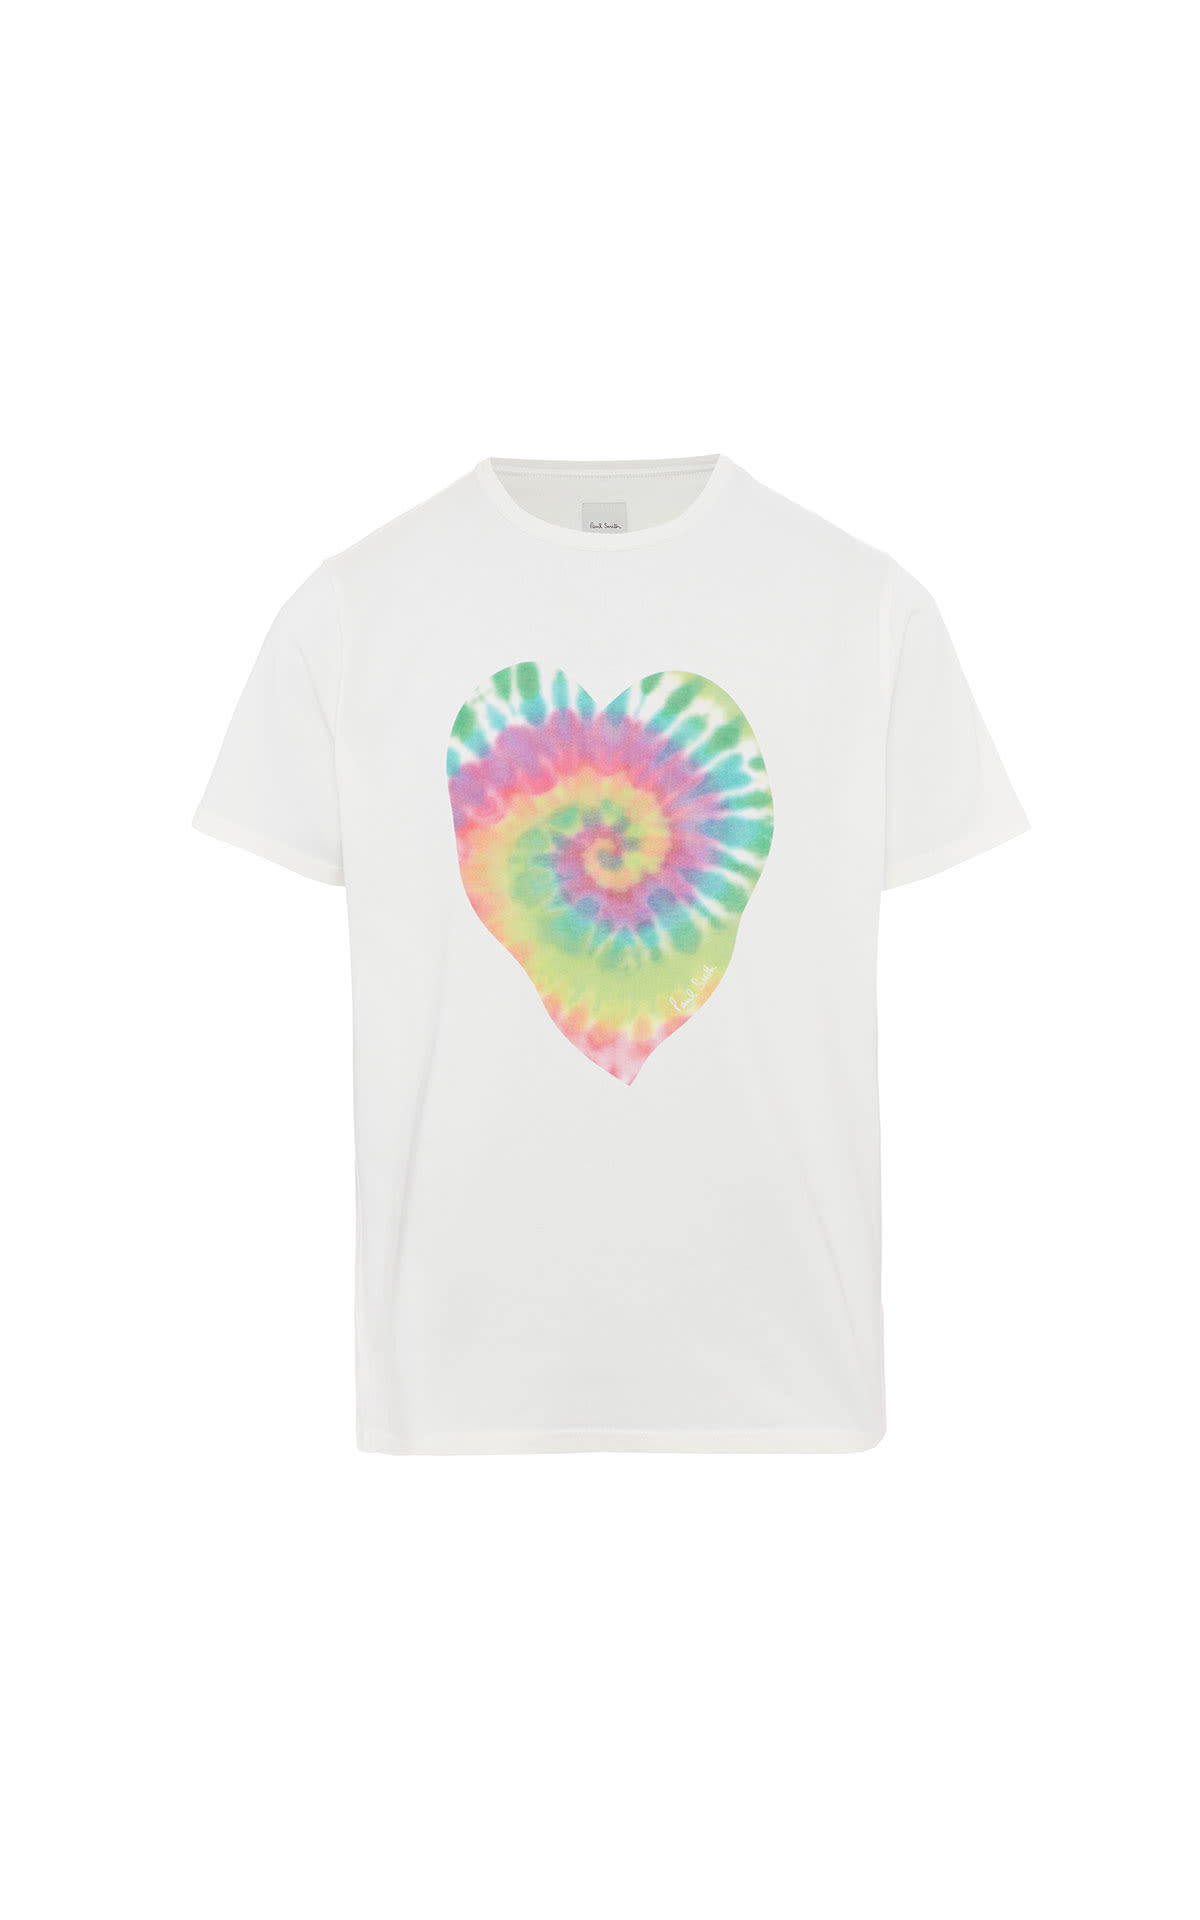 Paul Smith Tie and dye heart t-shirt from Bicester Village